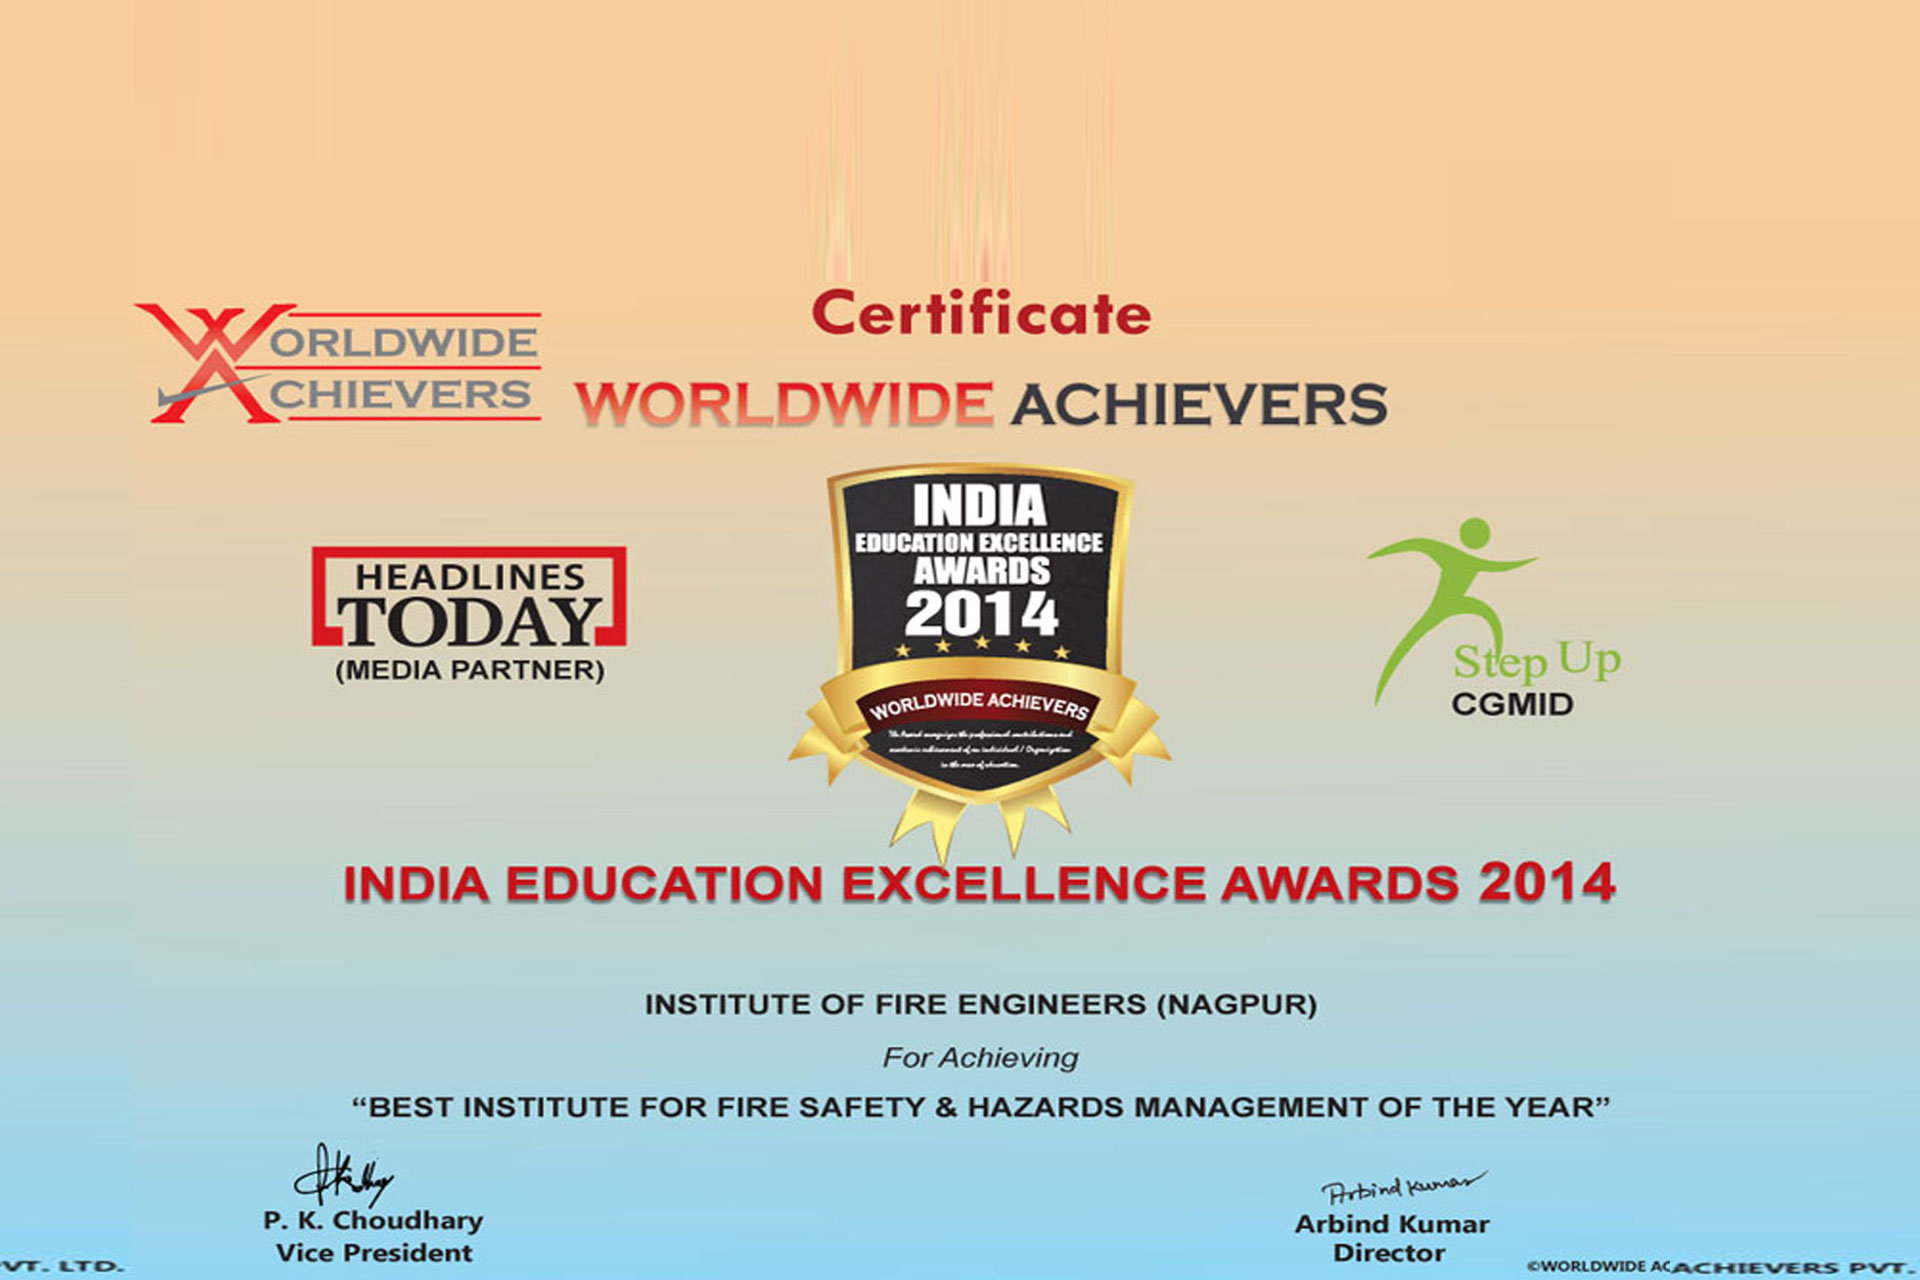 IFE Awarded INDIA EDUCATION EXCELLENCE AWARDS 2014 in New Delhi